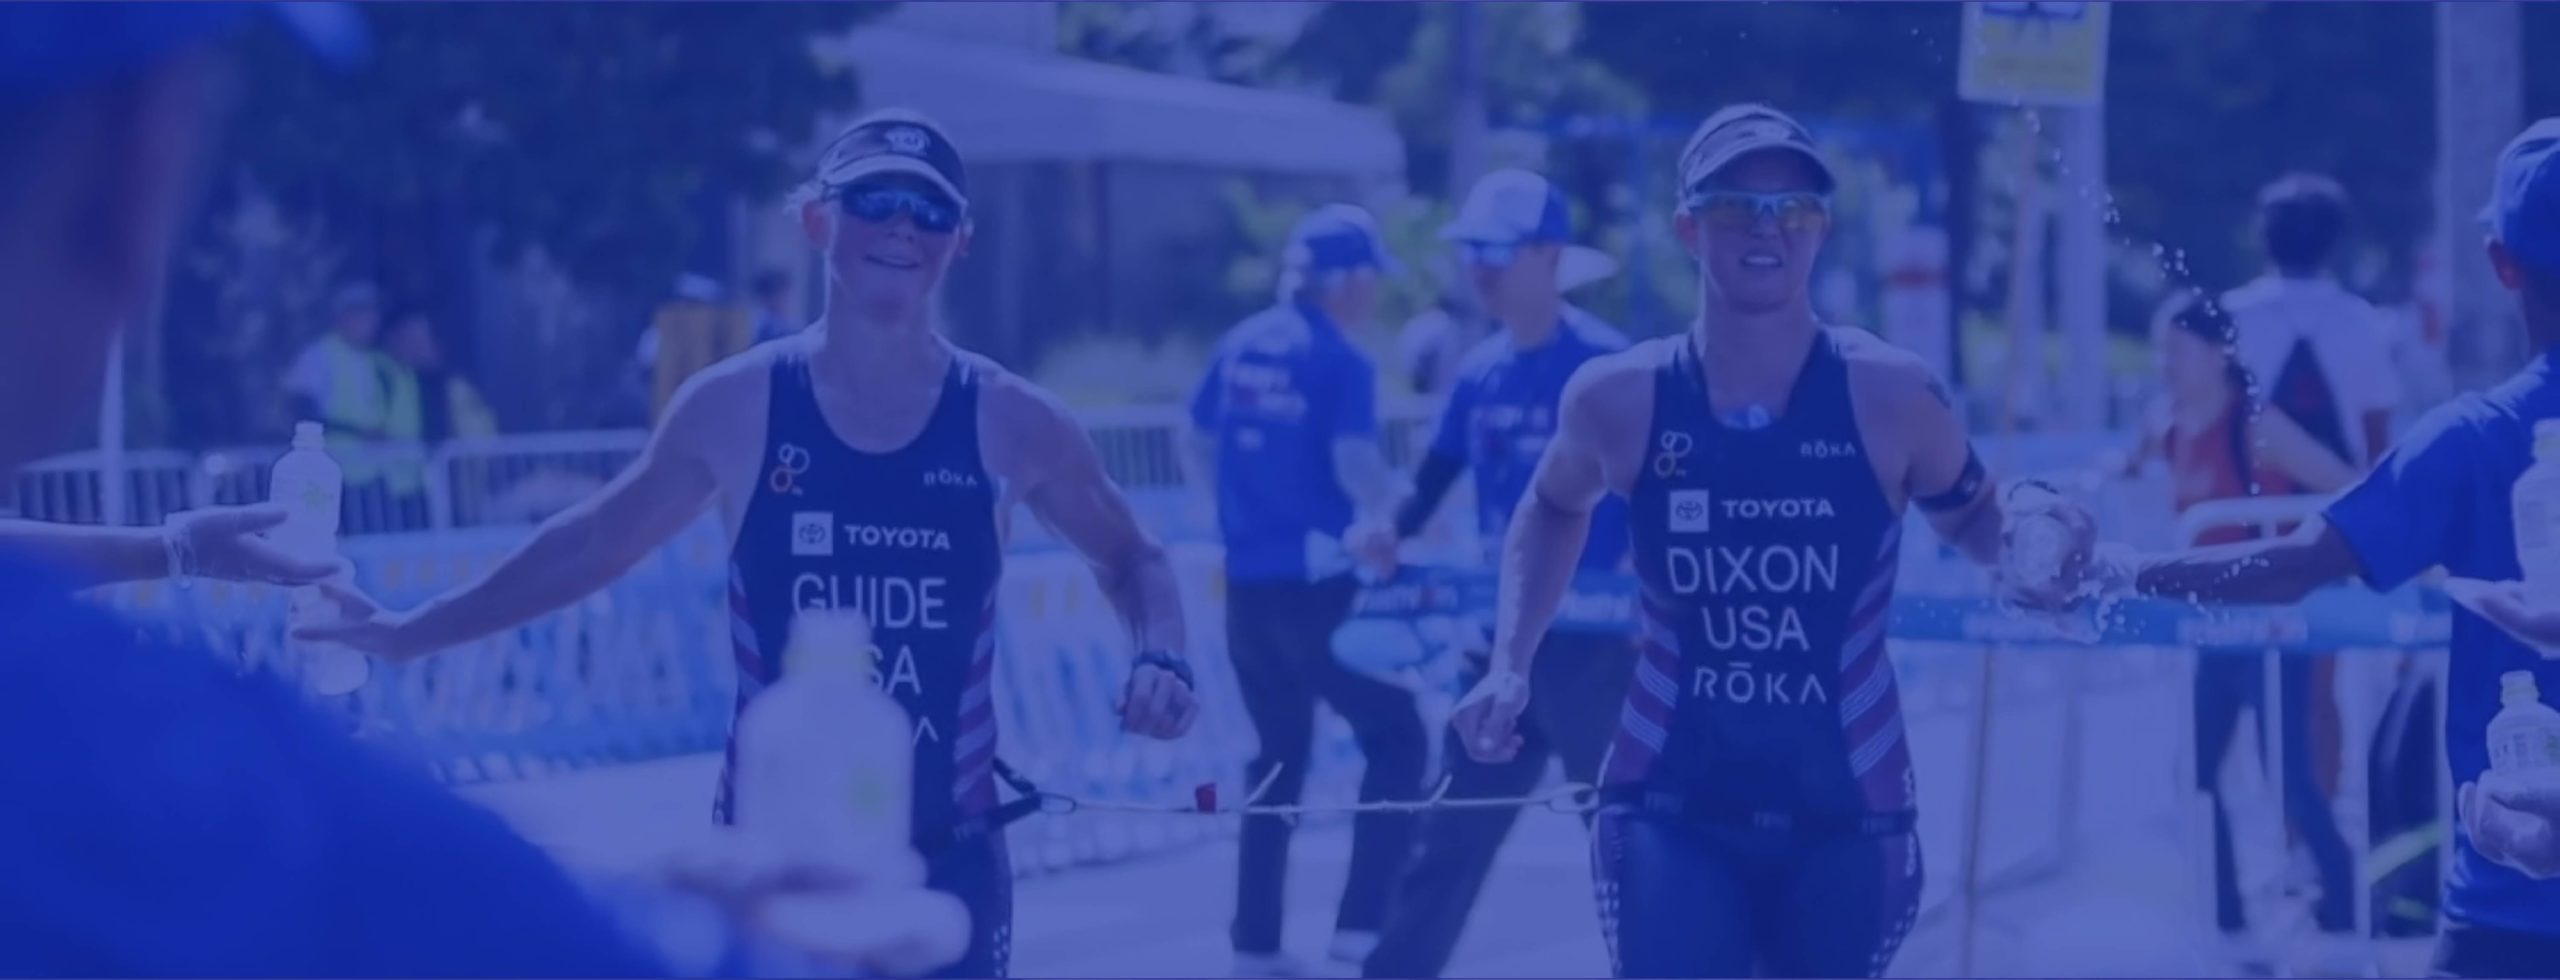 CBS8 – Amy Dixon: 45-year-old, blind triathlete from Encinitas heads to Paralympics in Tokyo